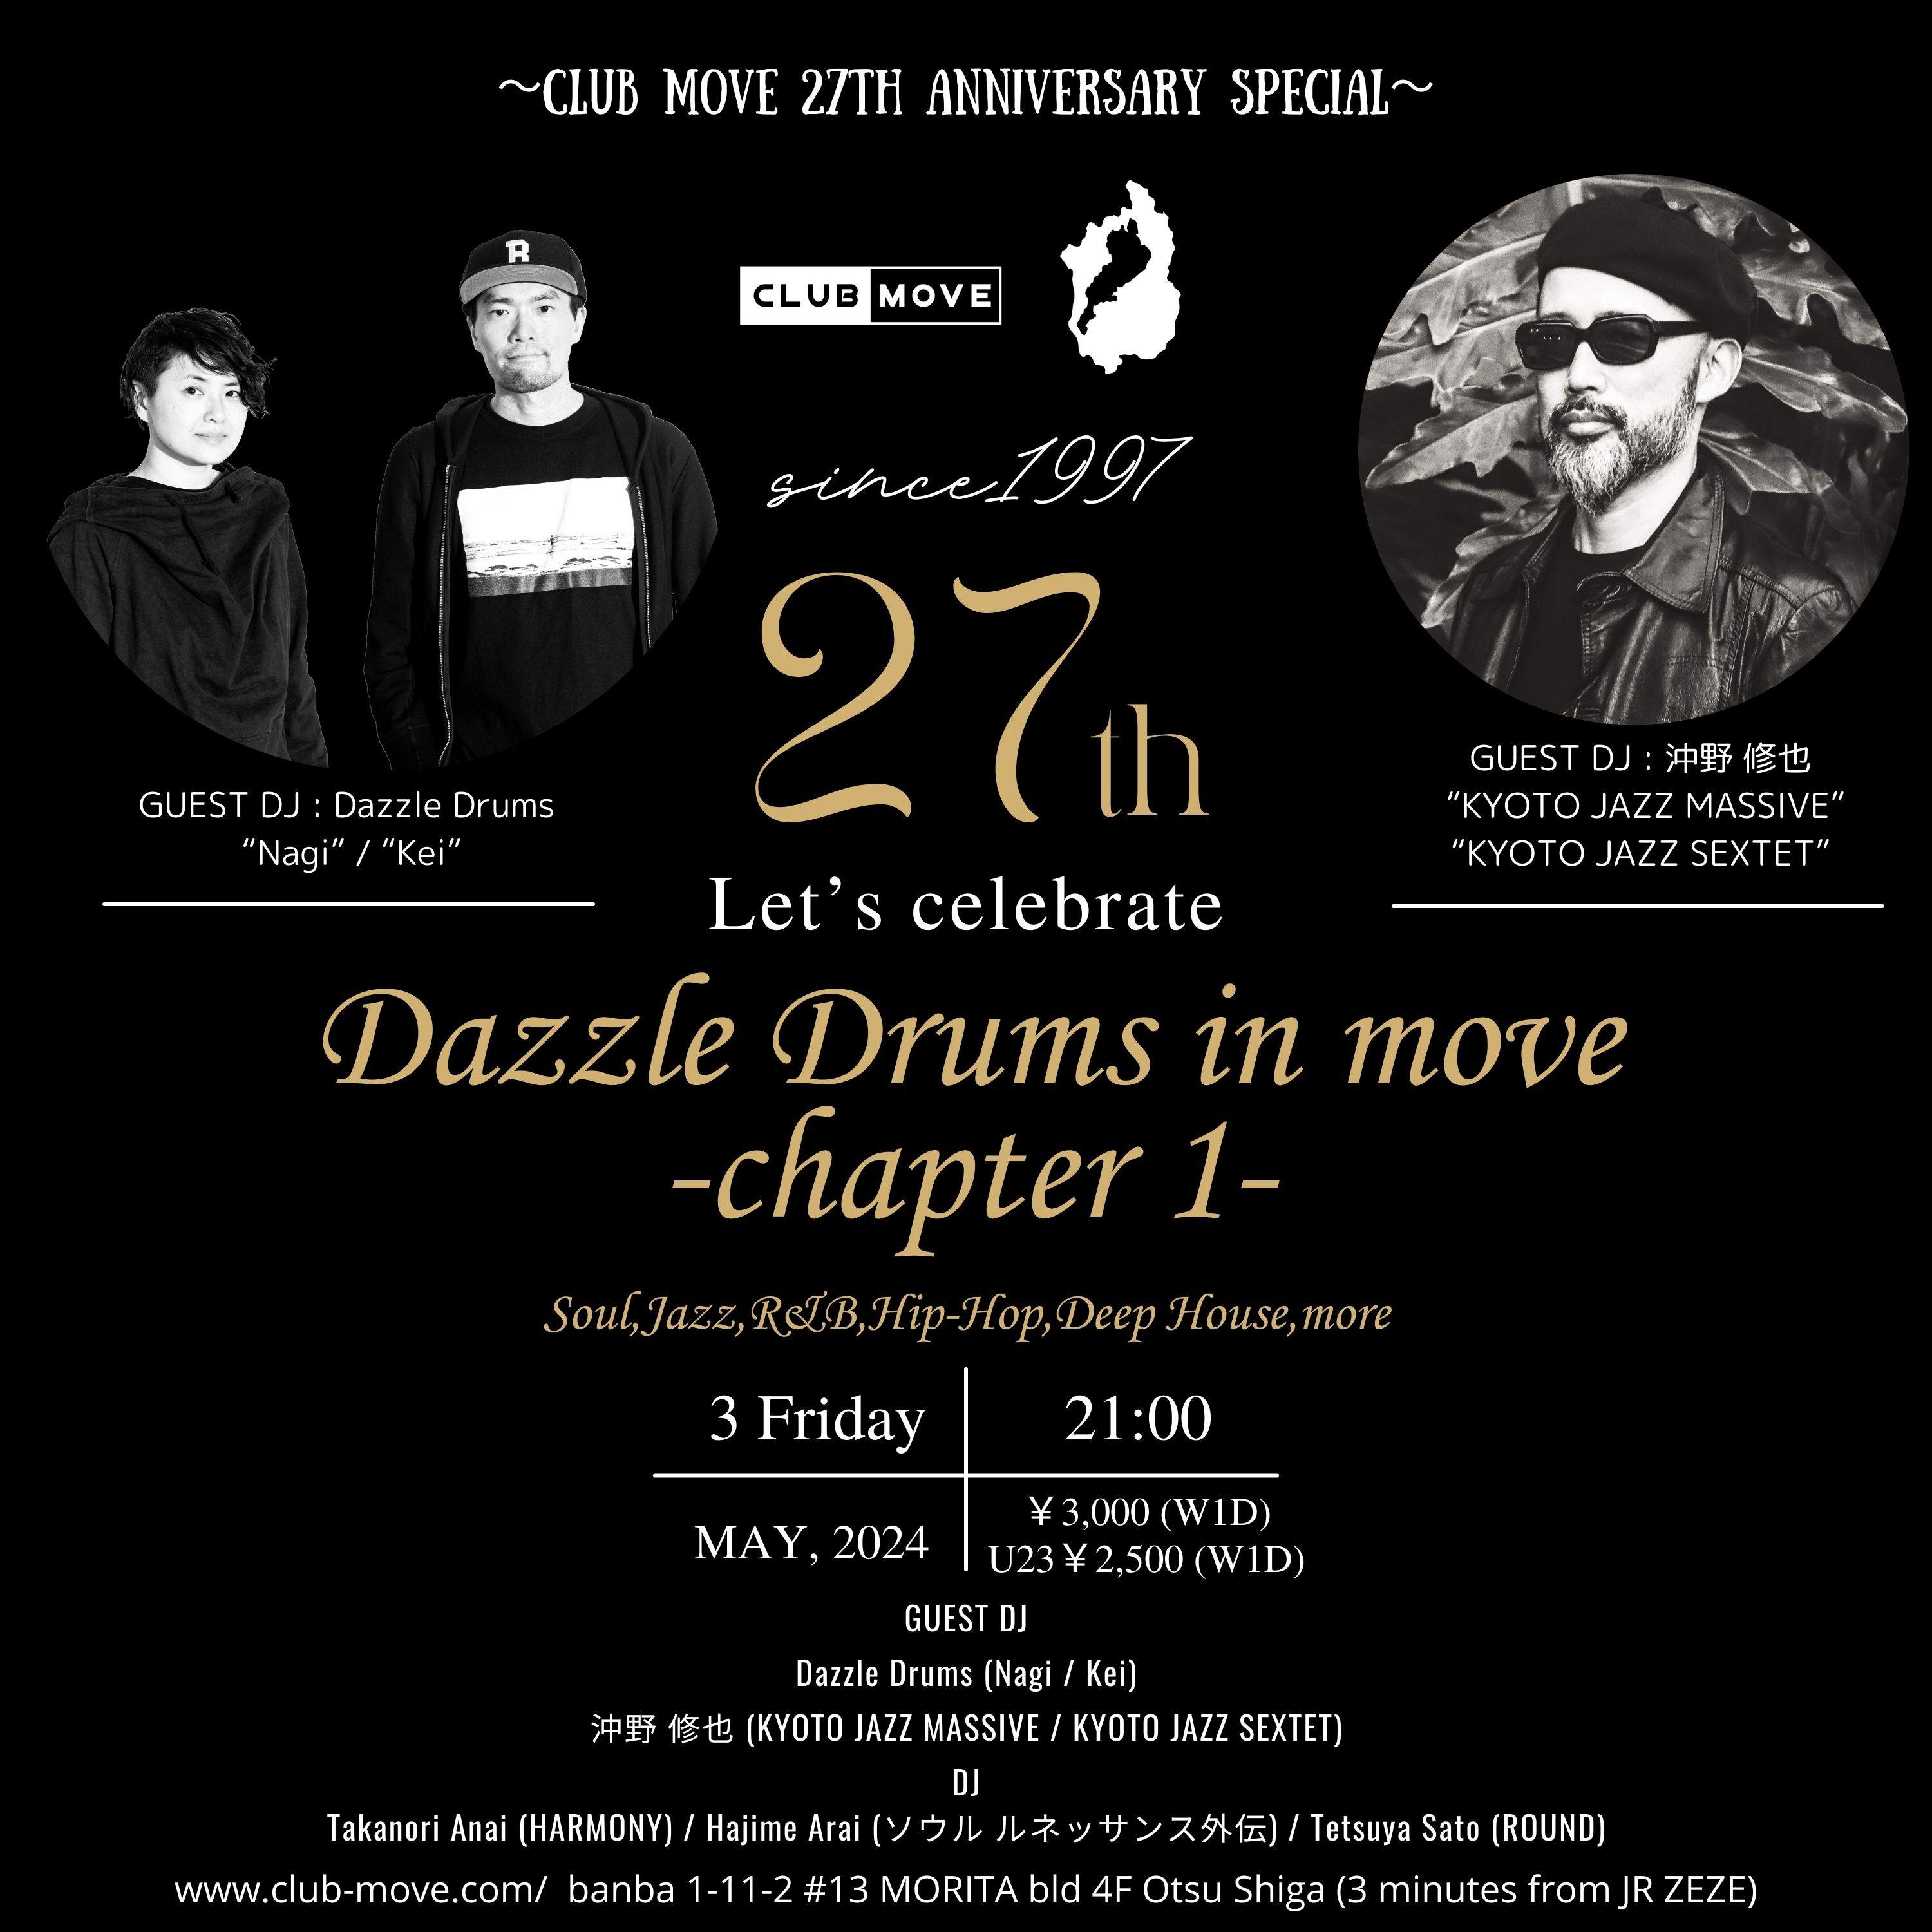 ～CLUB MOVE 27th Anniversary Special～ Dazzle Drums in MOVE -chapter 1- - フライヤー表